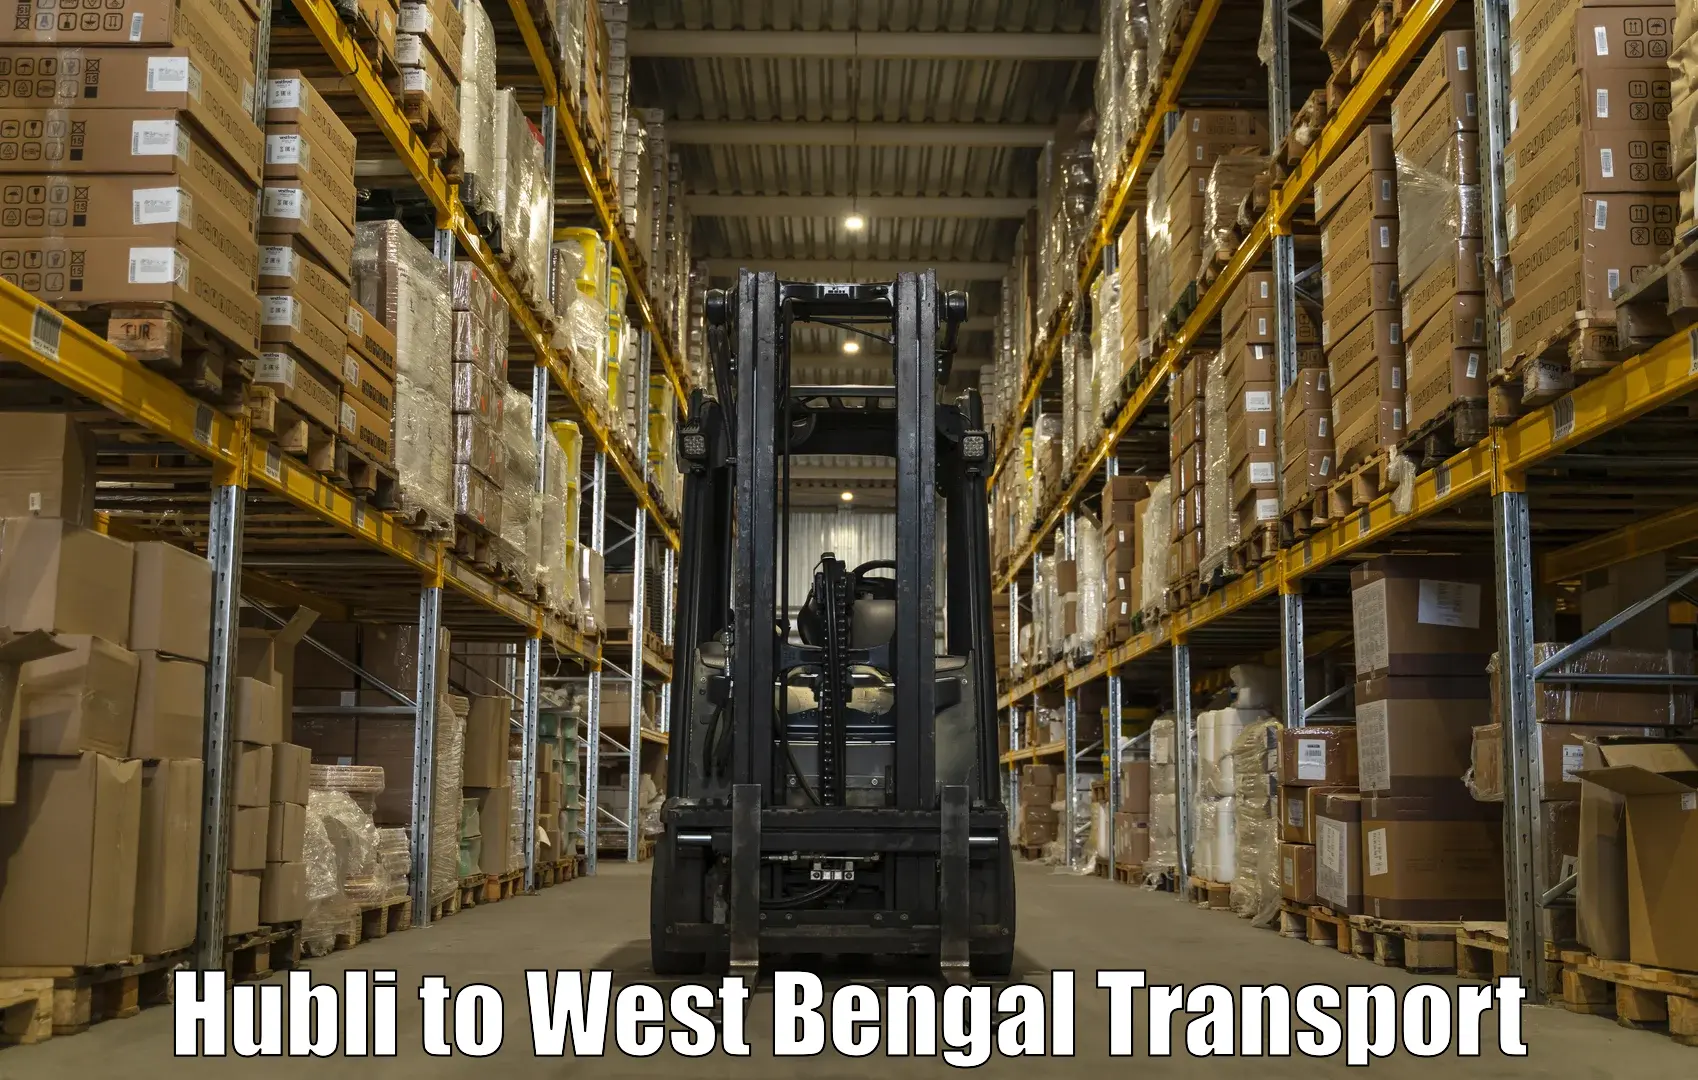 Cycle transportation service Hubli to West Bengal